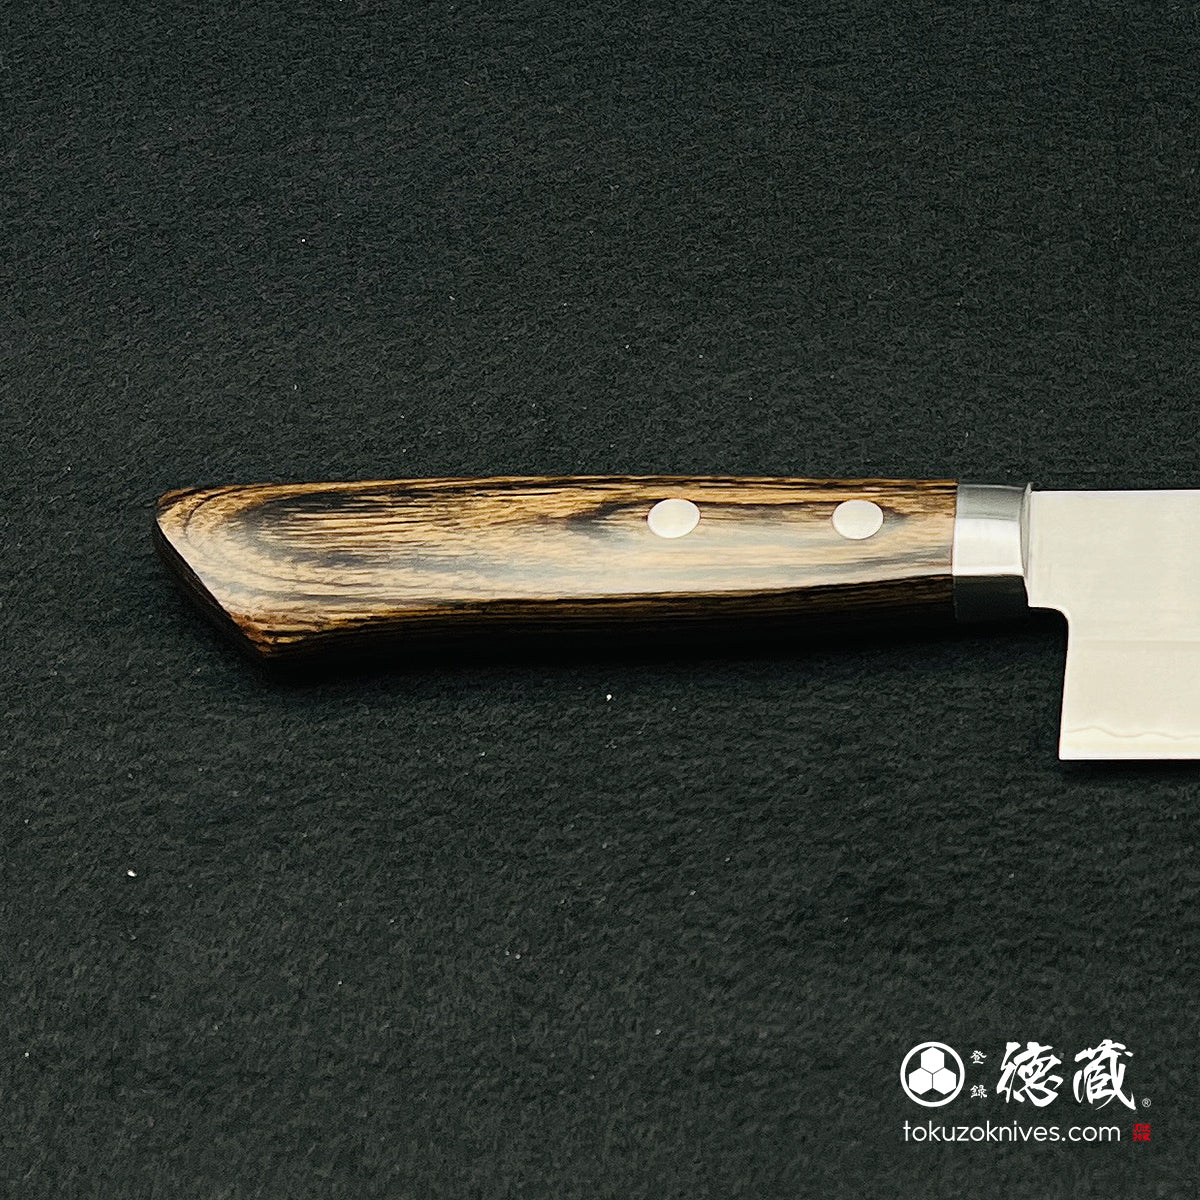 VG1 vegetable knife with scotch handle